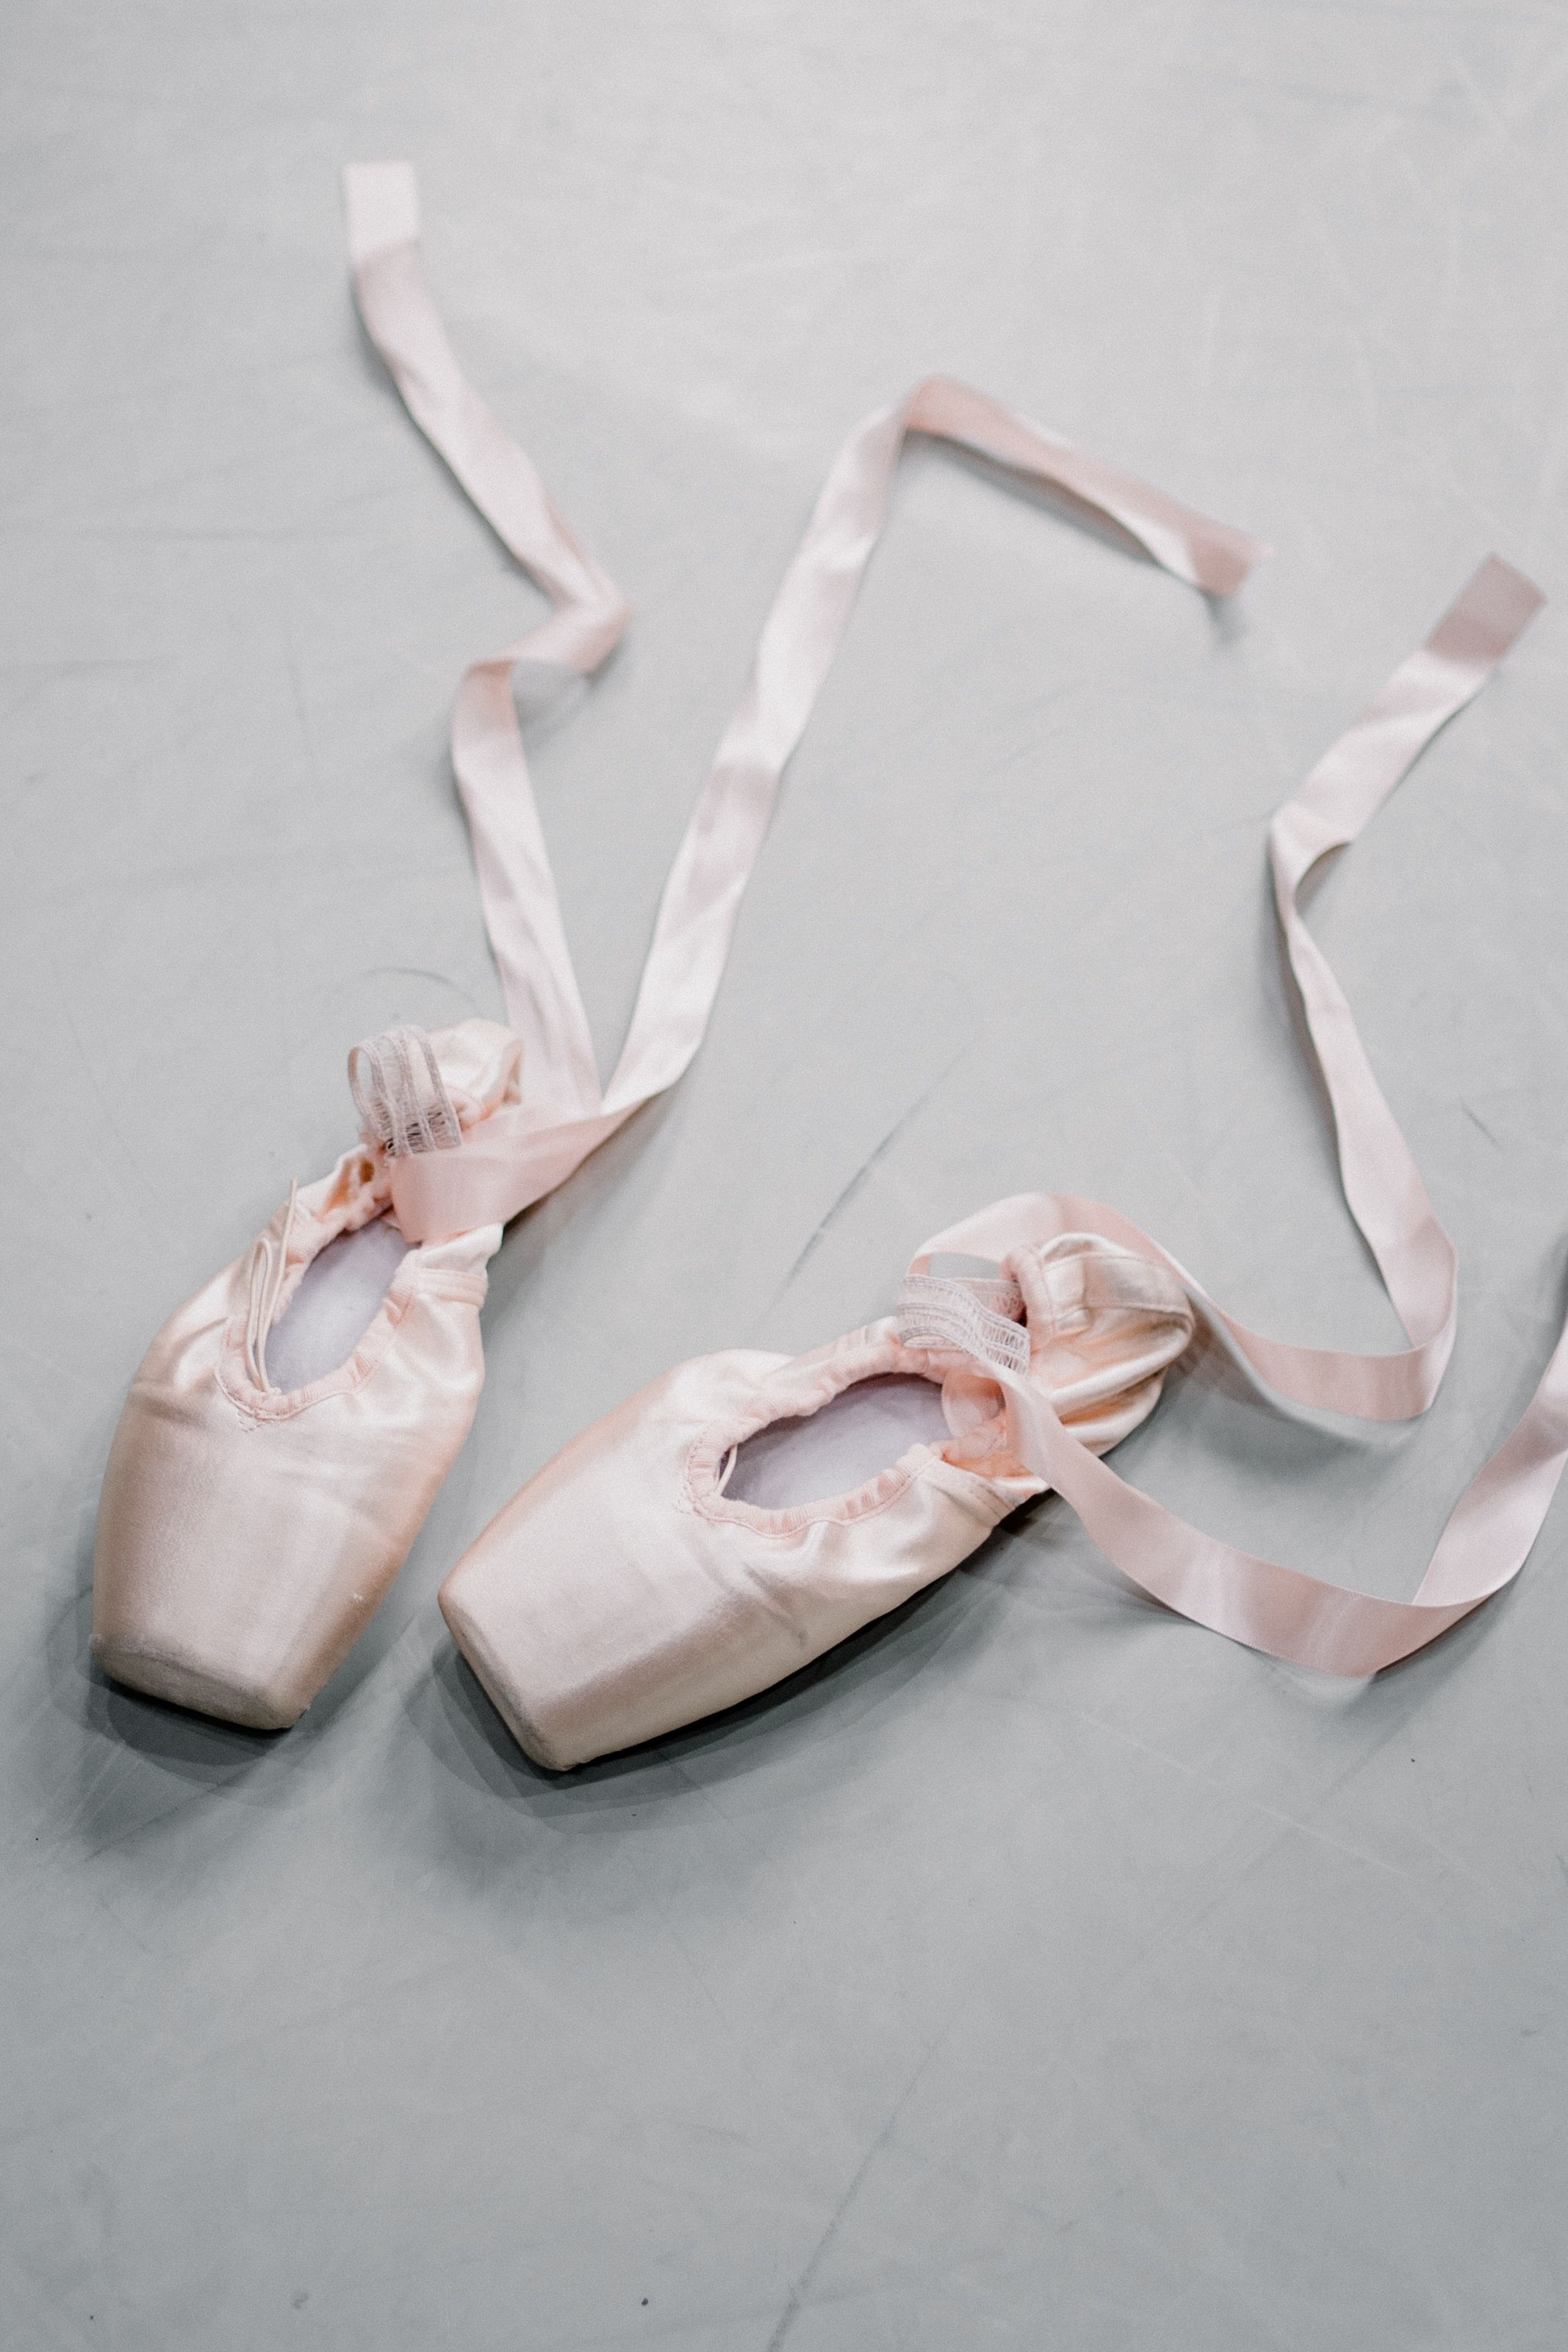 A pair of pink ballet shoes with ribbons on the floor - Shoes, ballet